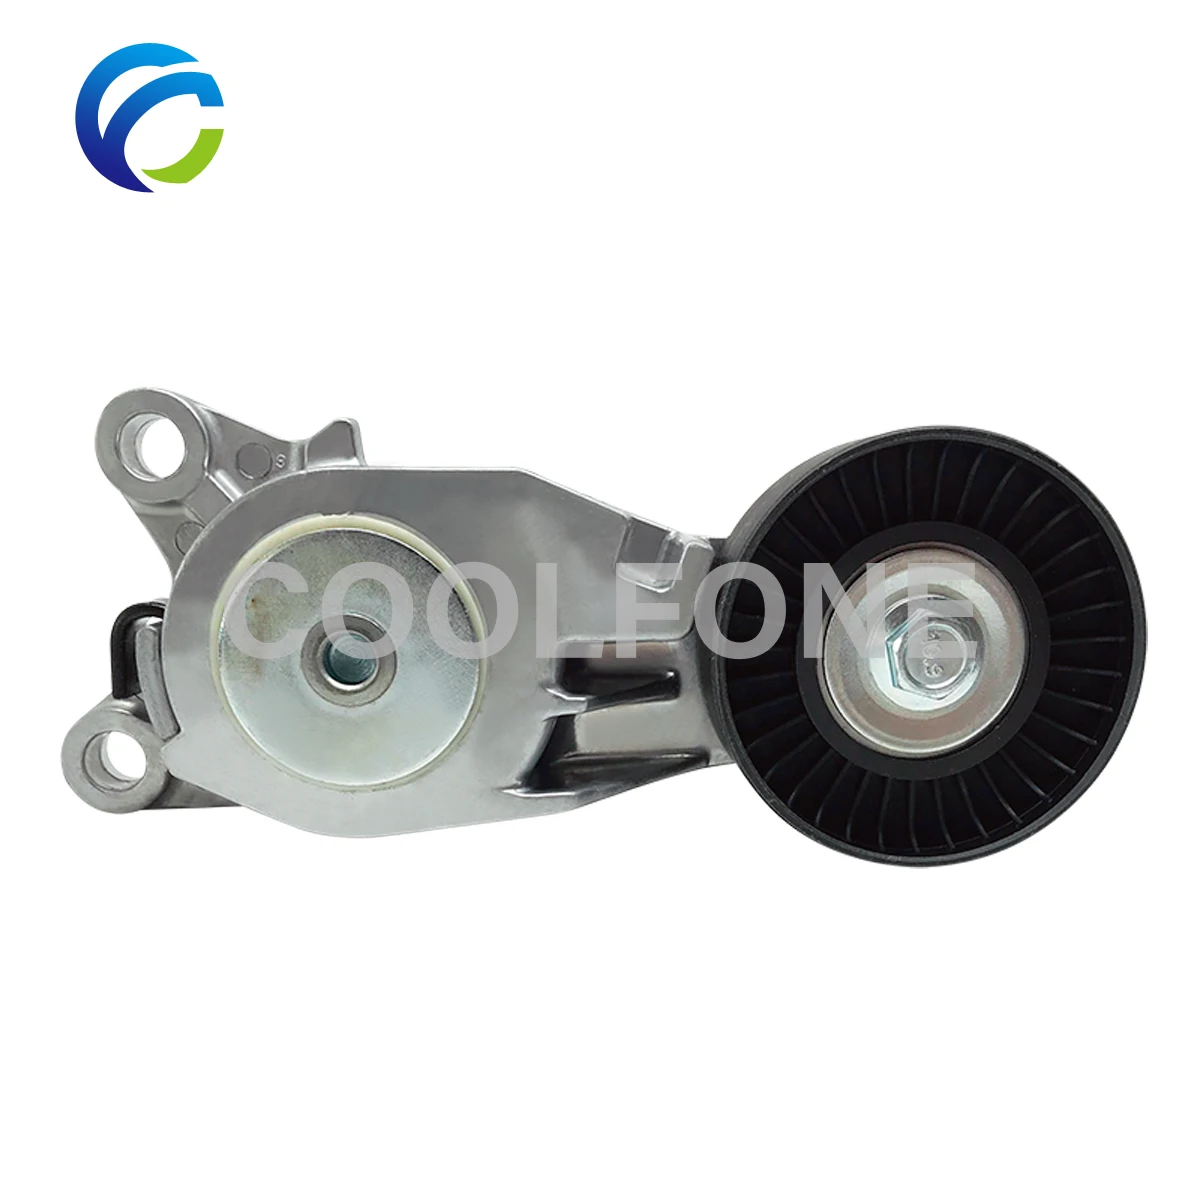 

Drive Belt Automatic Tensioner for FORD TEMPO MERCURY TOPAZ 2.3 E93E-6B209-AA F13E6B209A F13Z6B209A F13E6B209AA 88909607